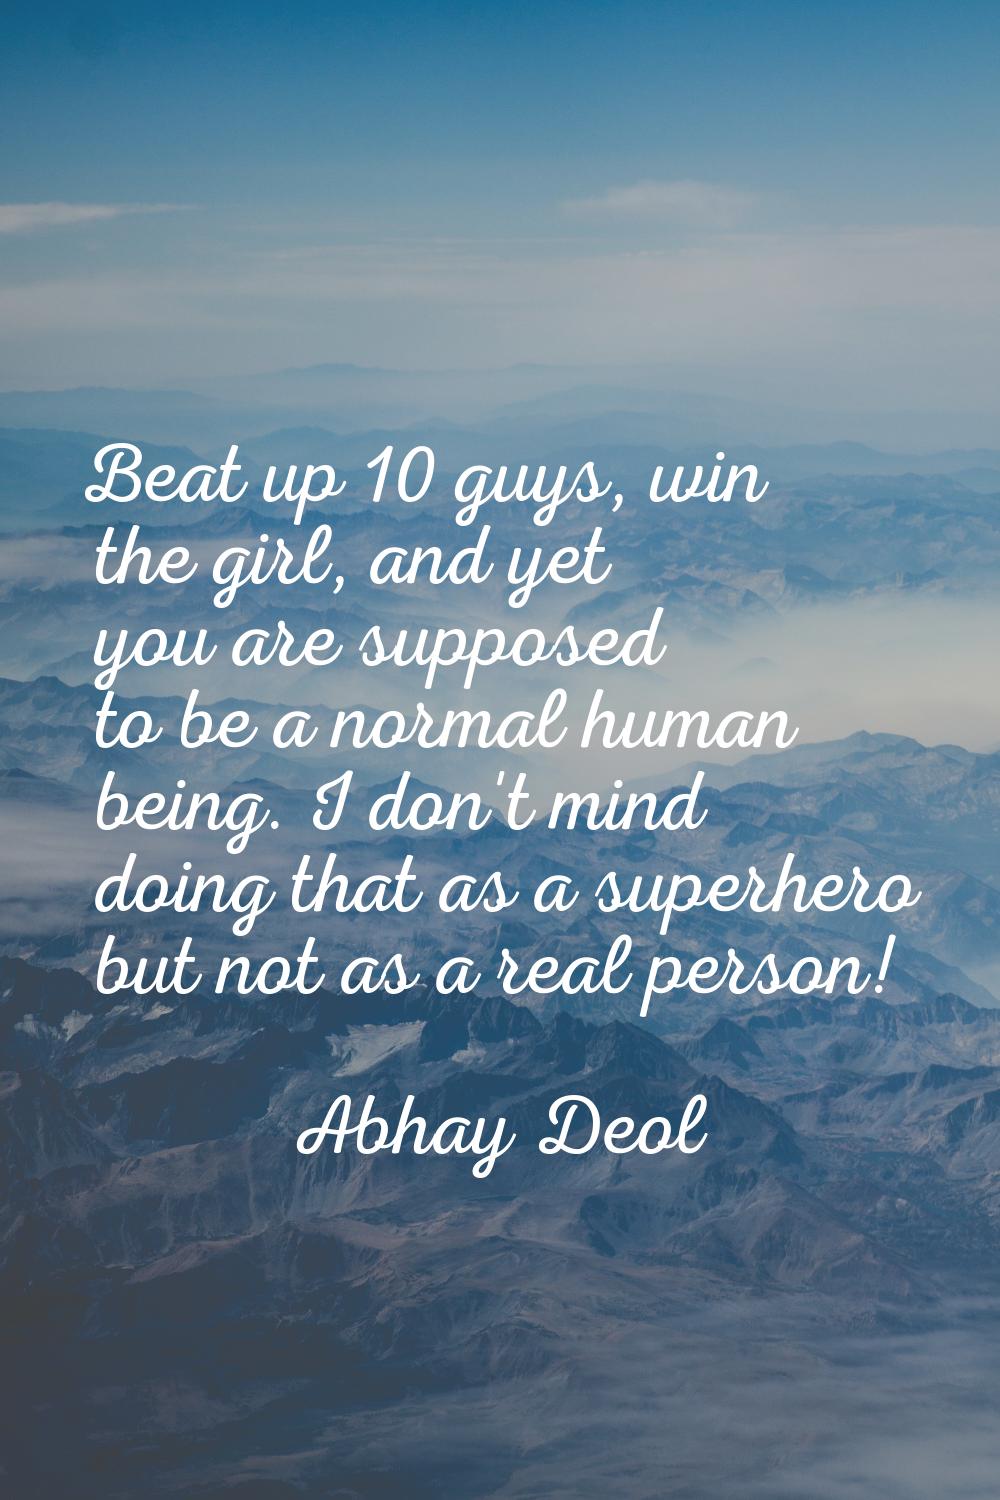 Beat up 10 guys, win the girl, and yet you are supposed to be a normal human being. I don't mind do